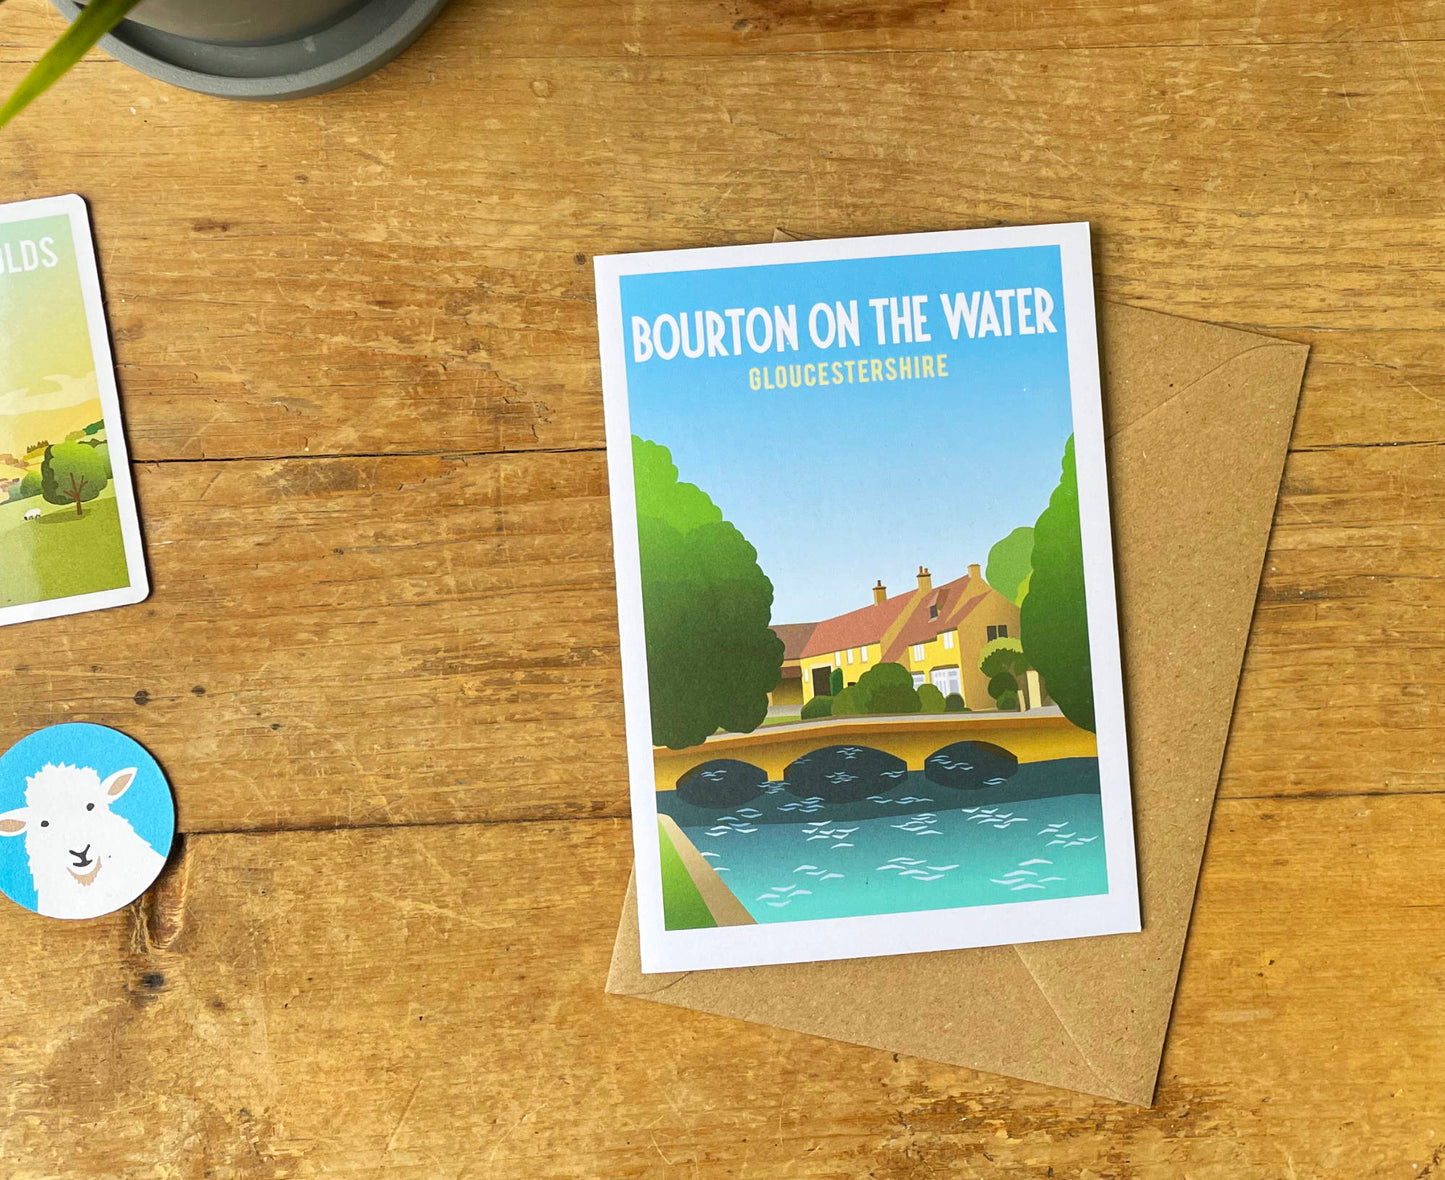 Bourton on the Water Greeting Card on table